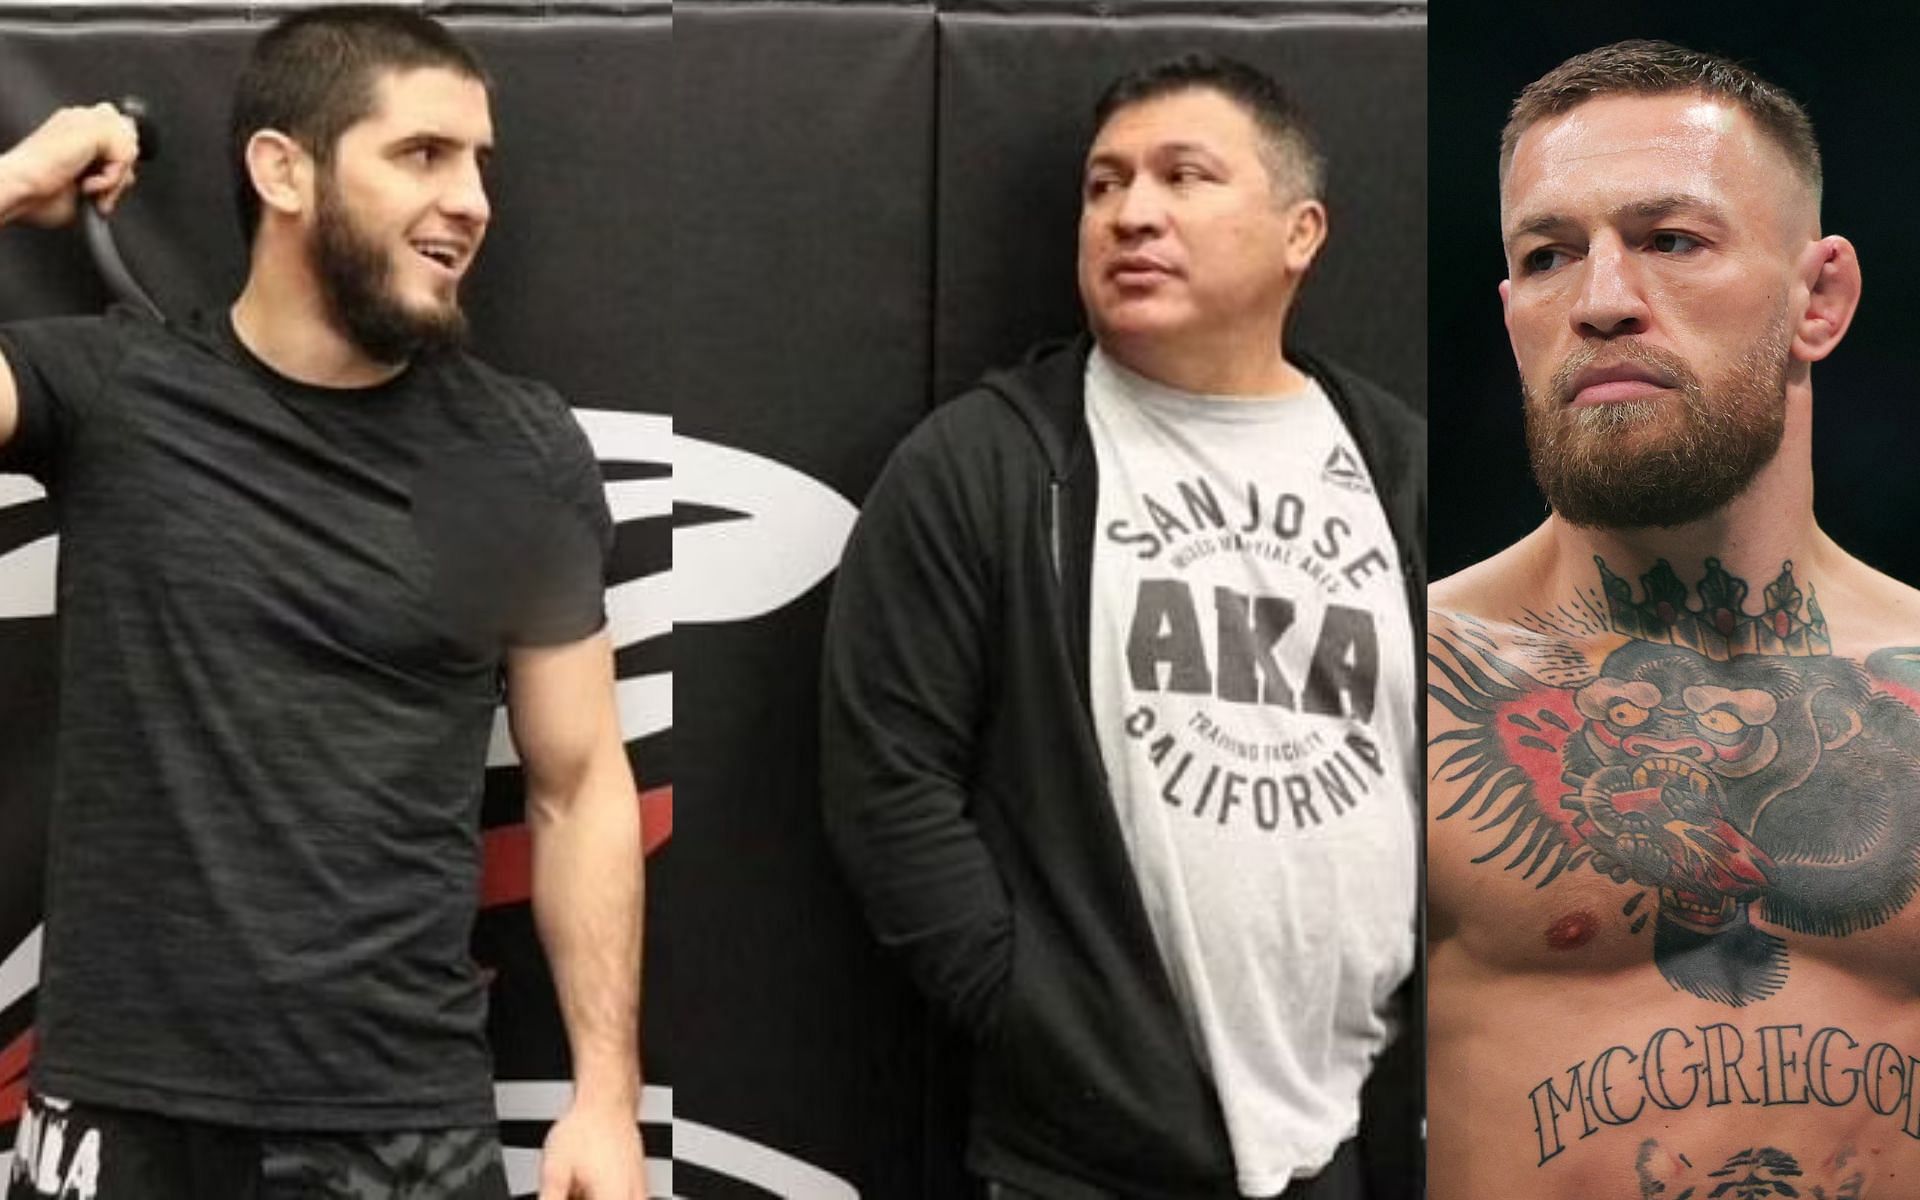 Islam Makhachev (left), Javier Mendez (center), and Conor McGregor (right). [Images courtesy: left and center from Instagram @islam_makhachev and right from Getty Images]